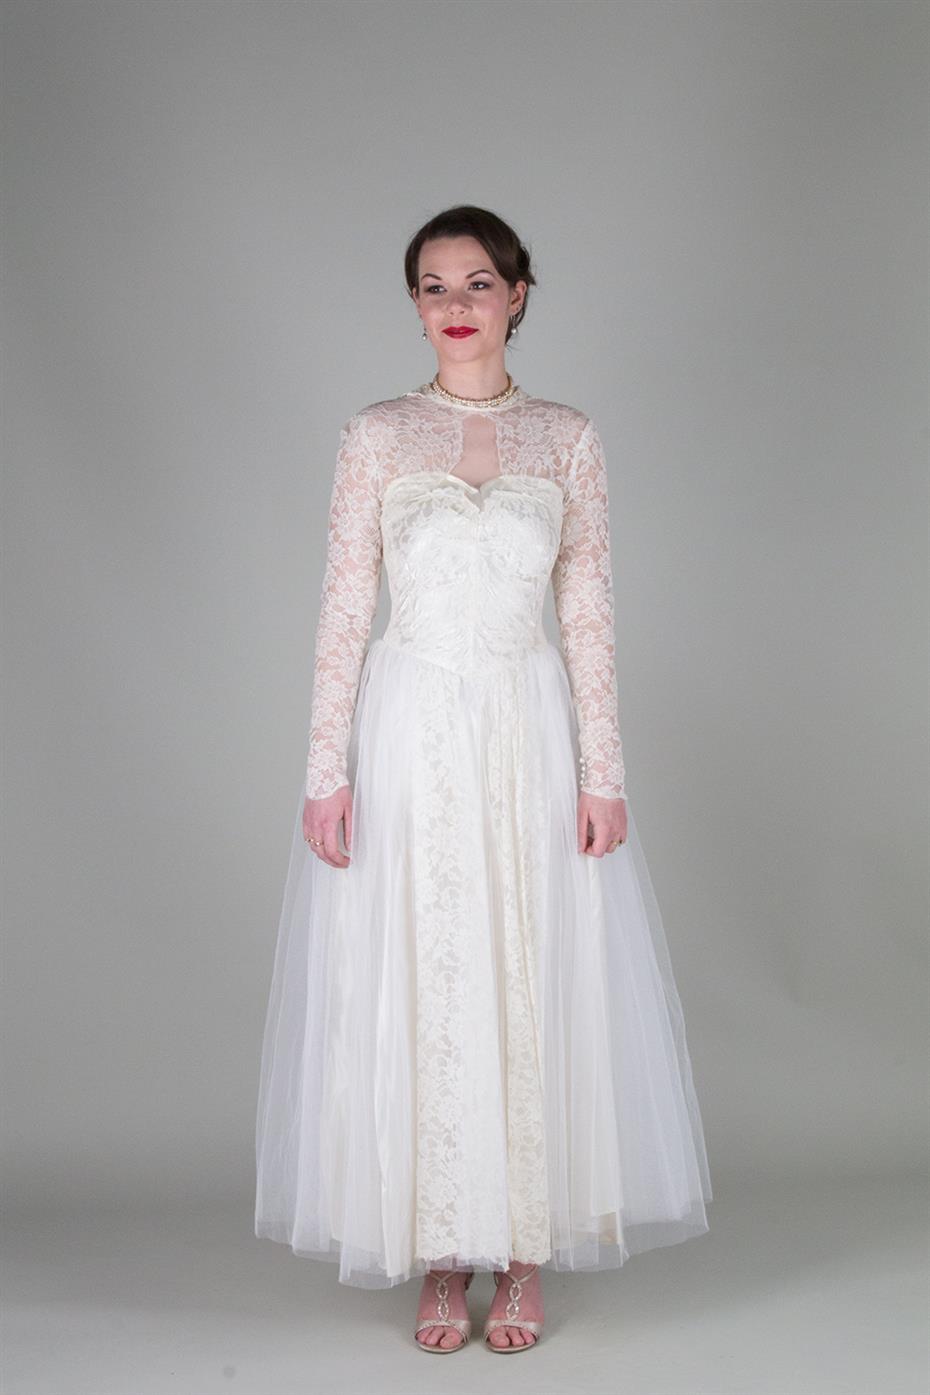 Dreamy Vintage Wedding Dresses From Authentic Vintage Bridal